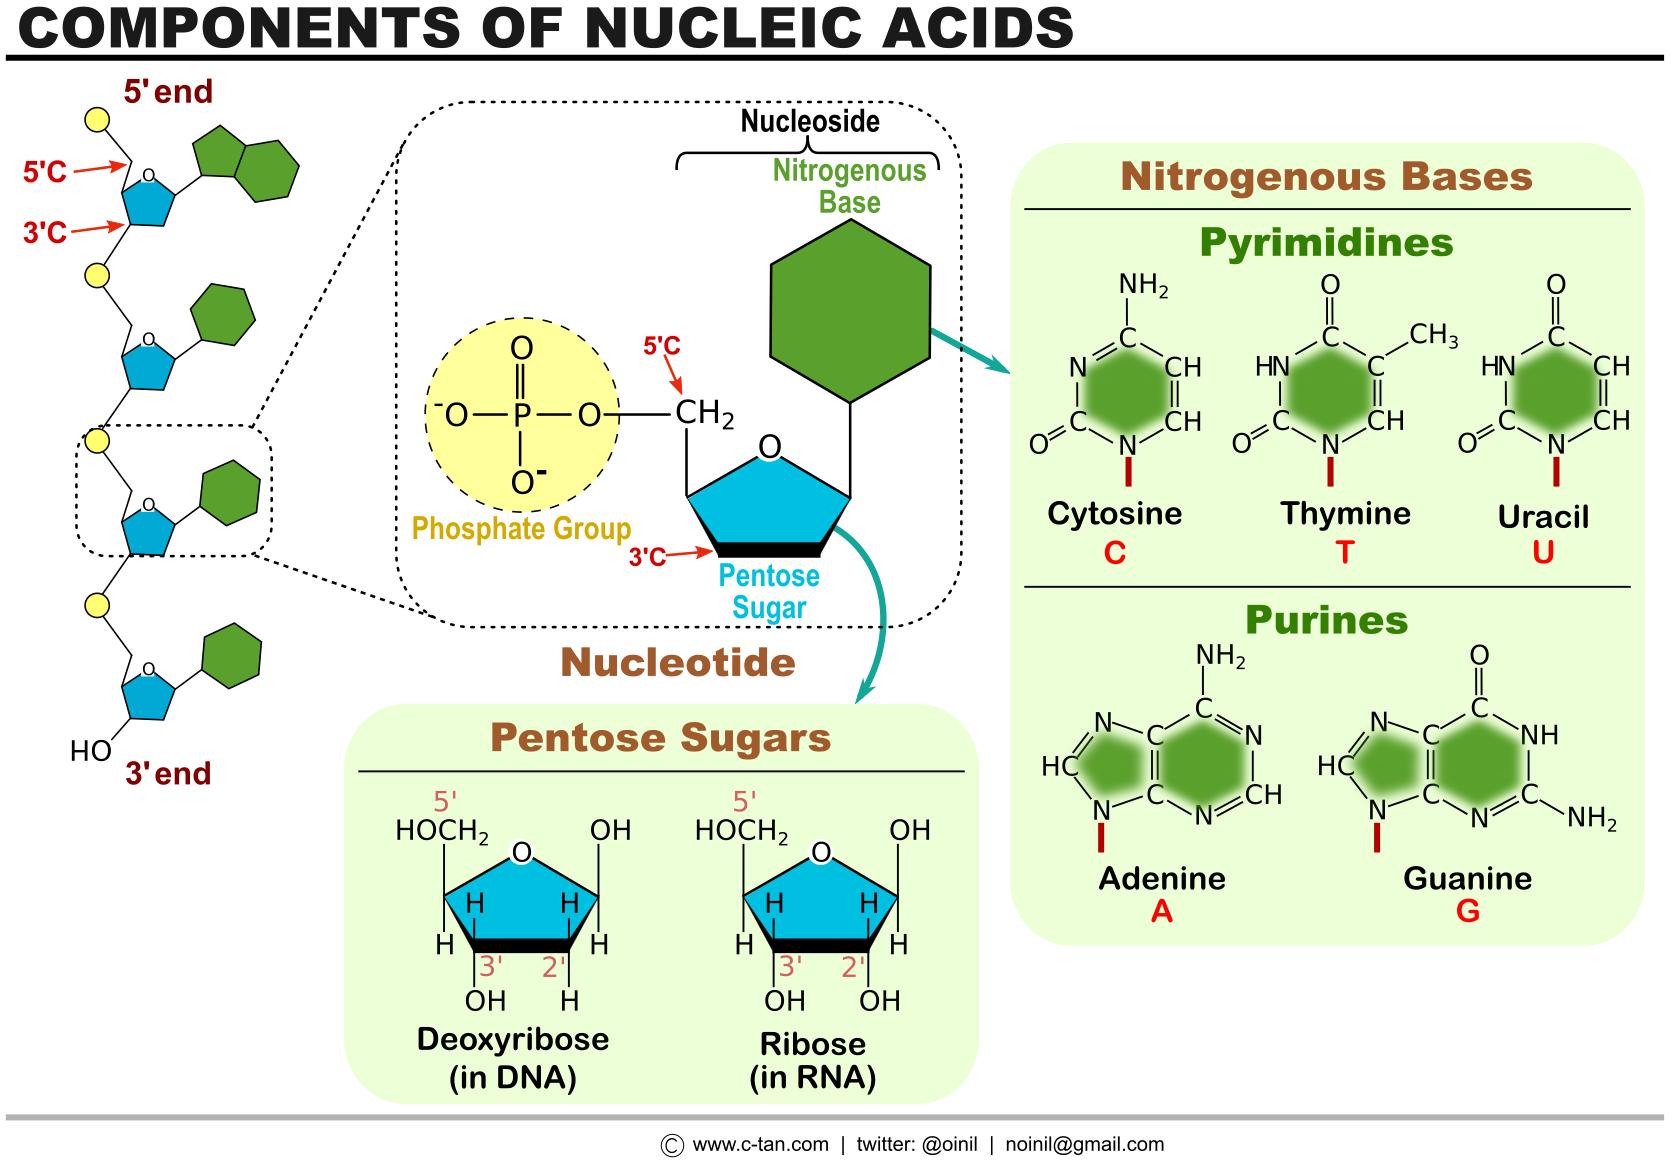 Figure: Components of nucleic acids.